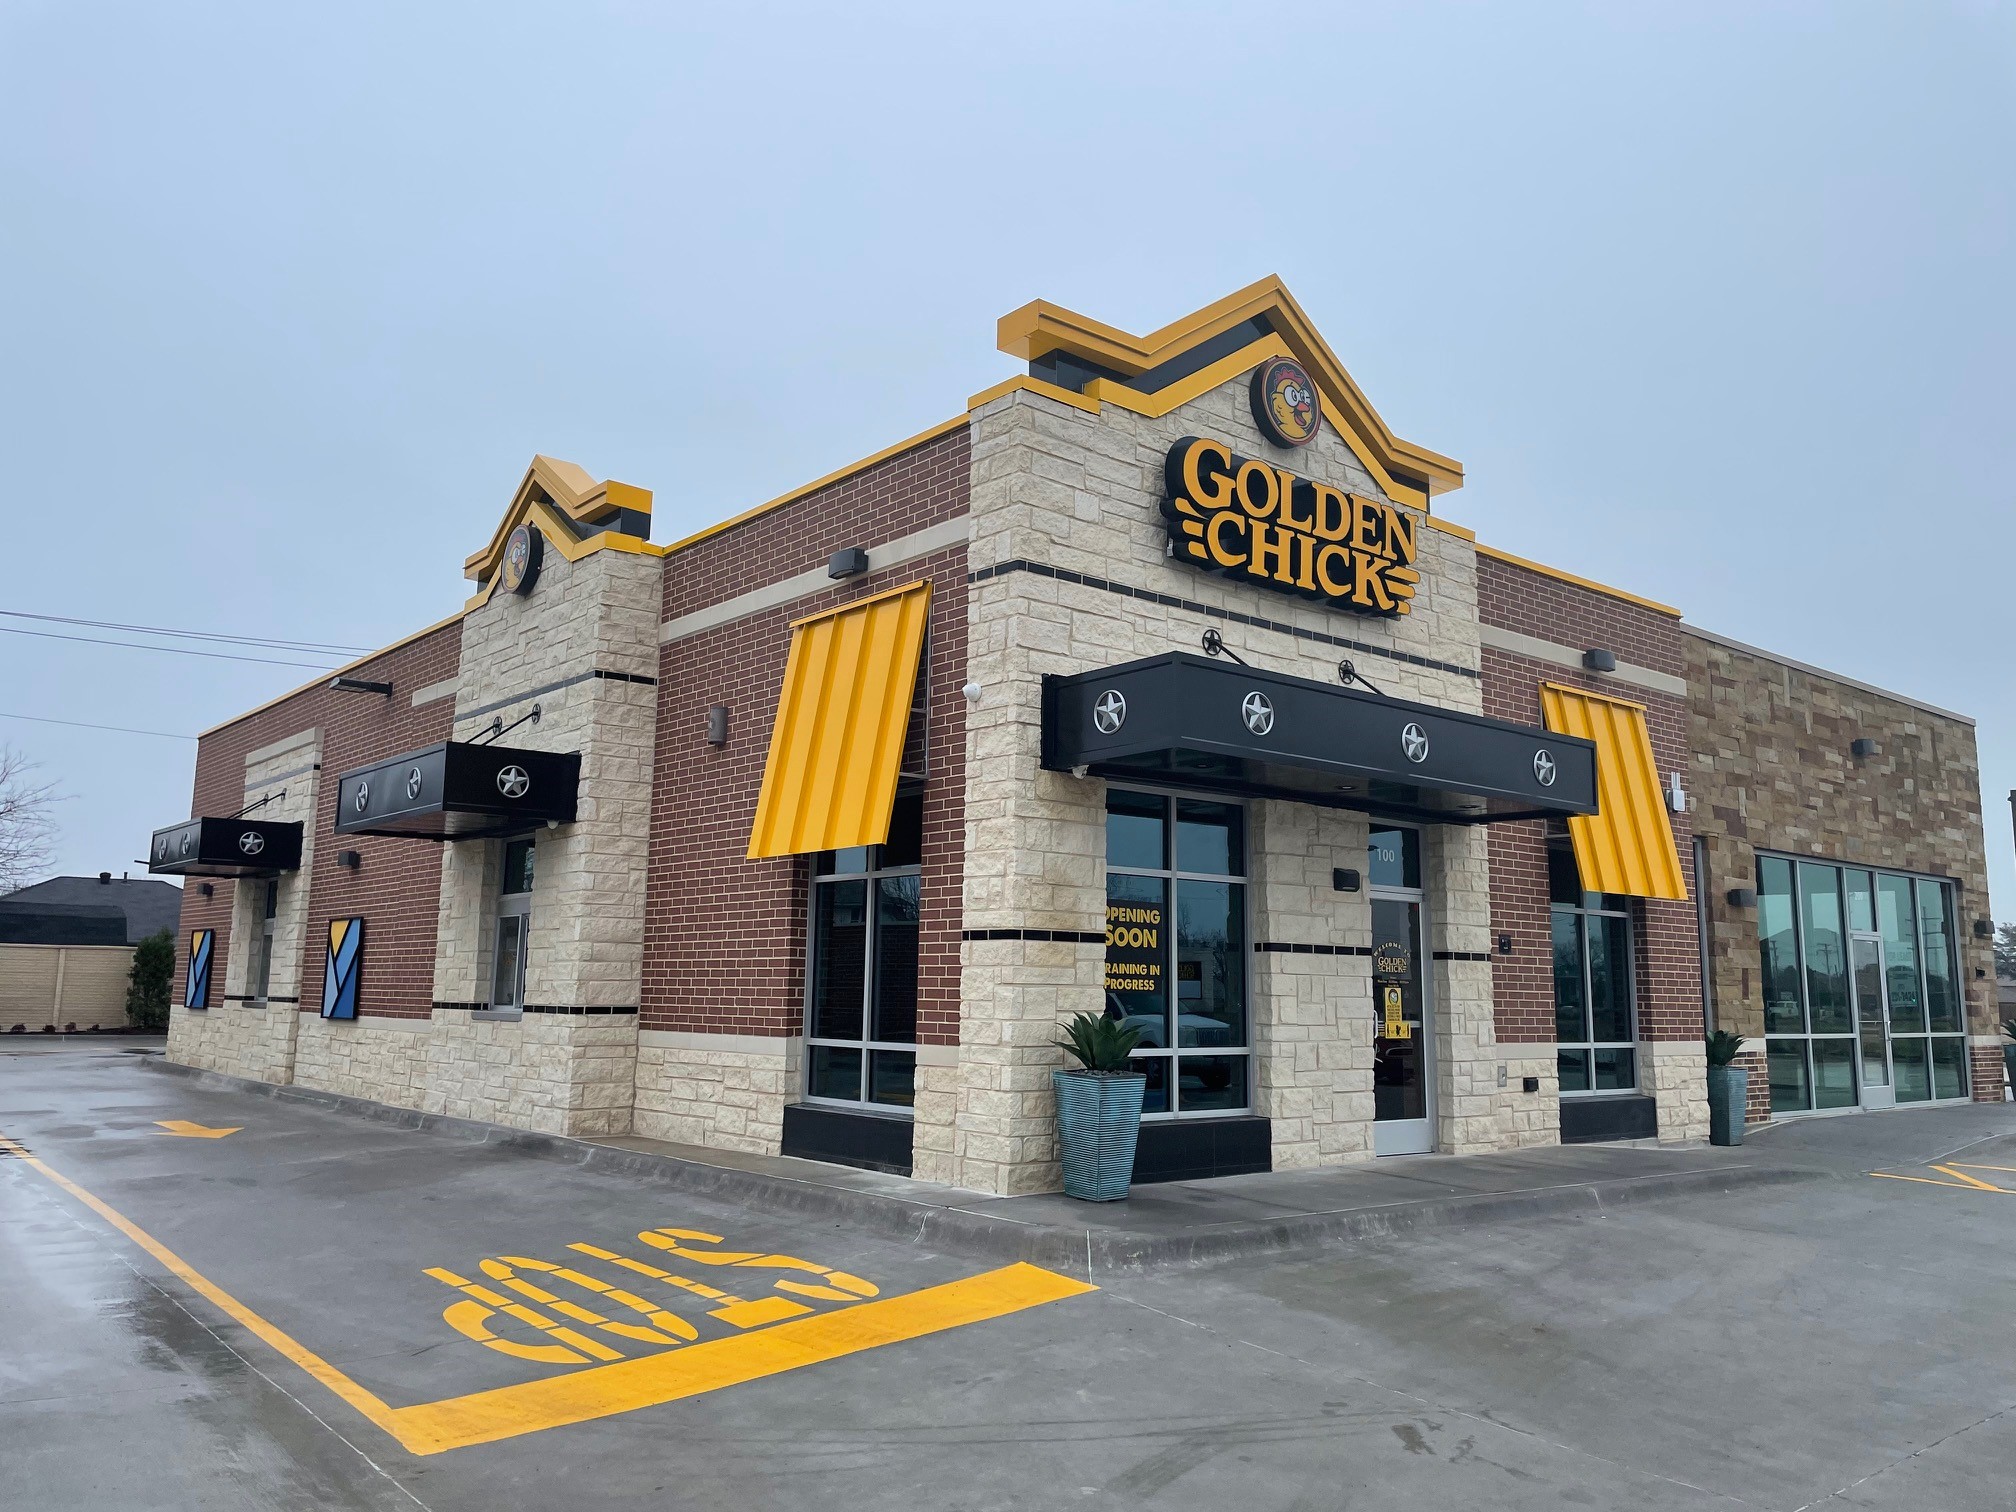 Golden Chick storefront.  Your local Golden Chick fast food restaurant in Rowlett, Texas